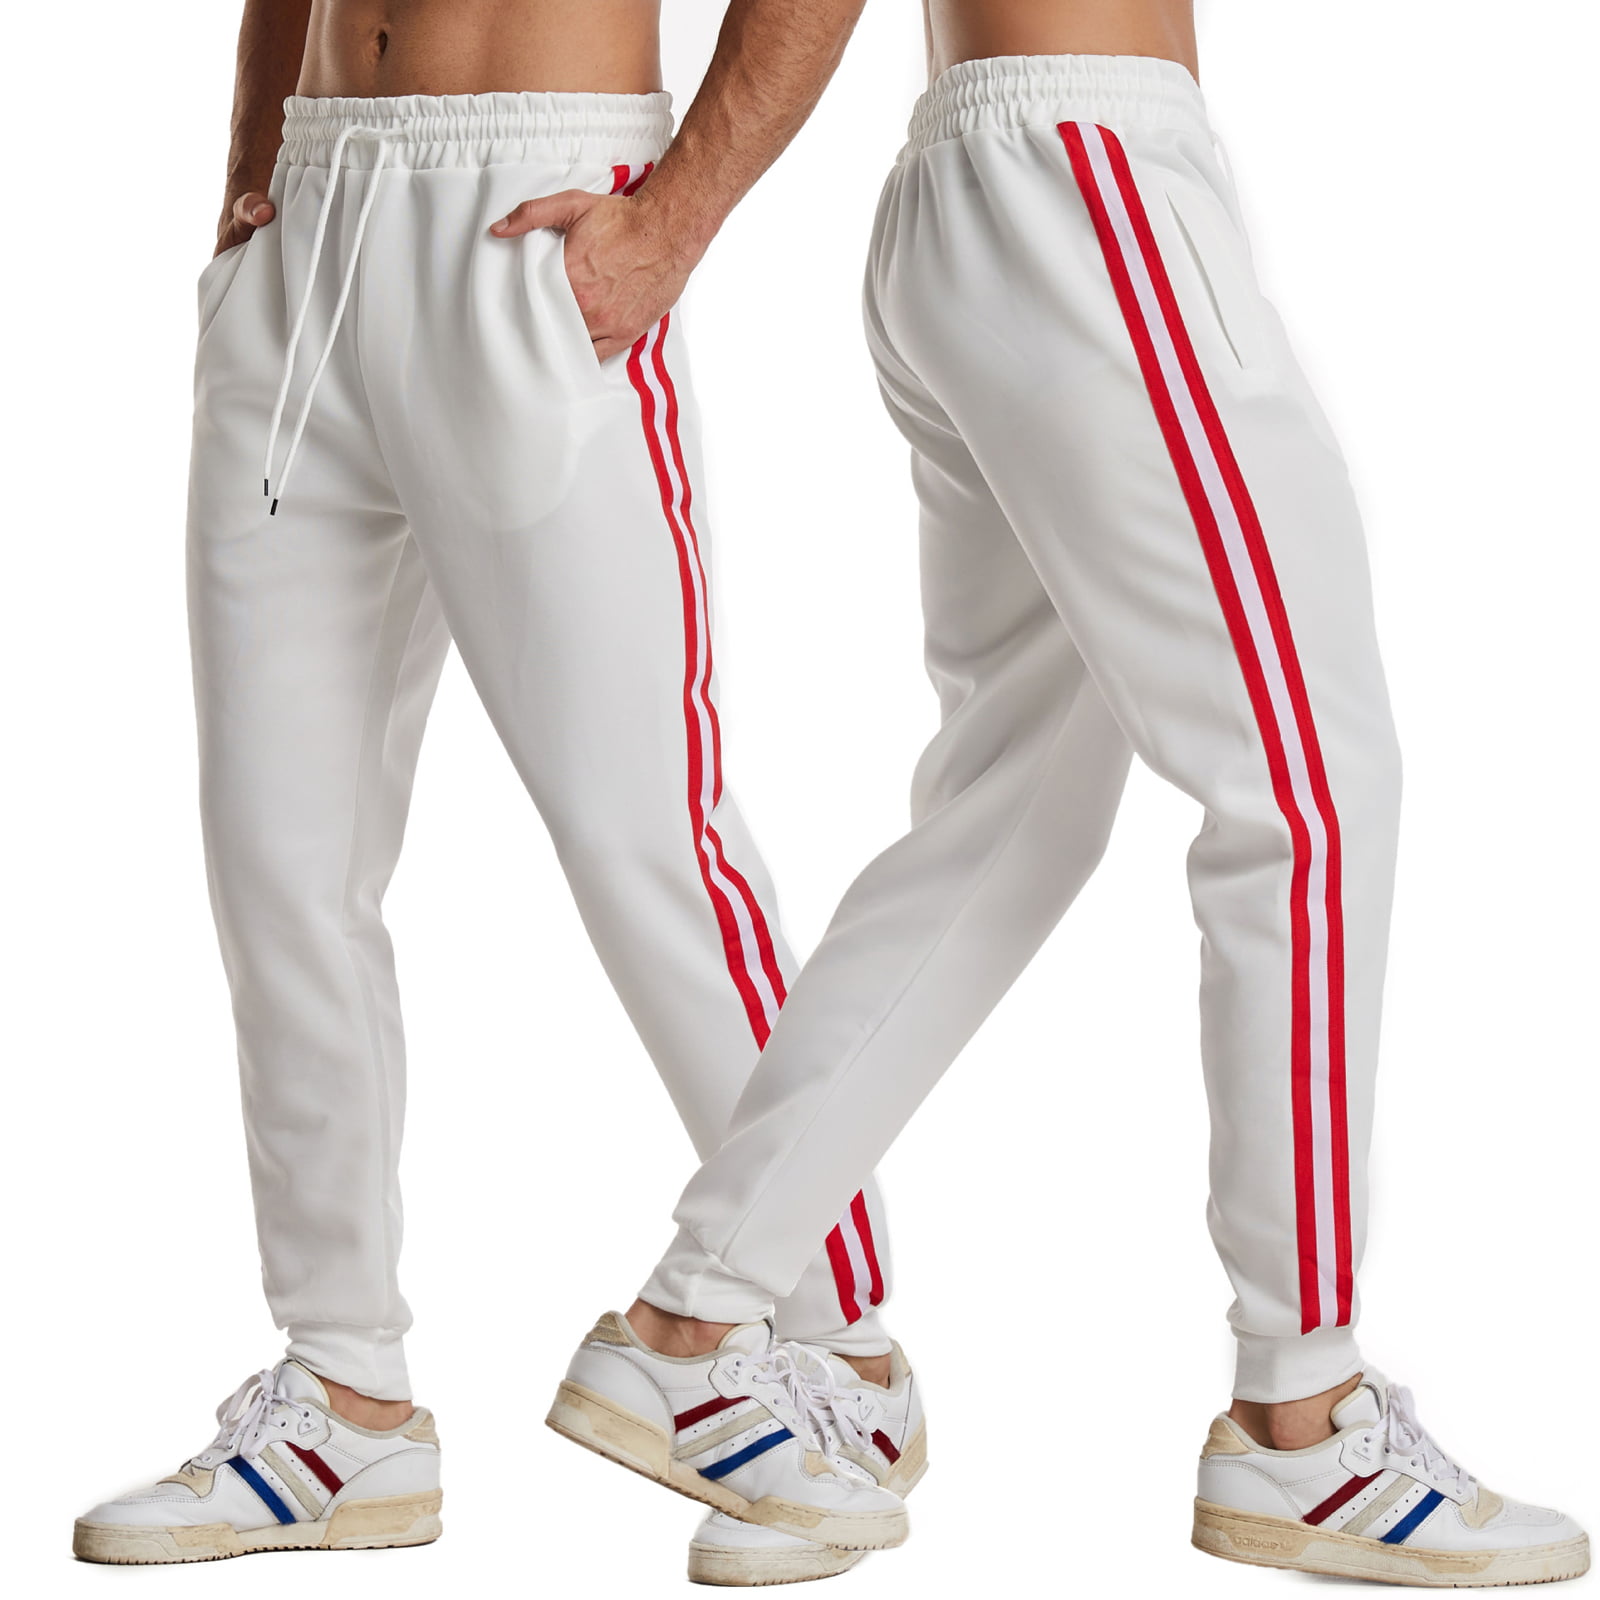 favmartha Mens Sweatpant with Elastic Waistband Hiking Side Stripe Thicken Athletic Pants 